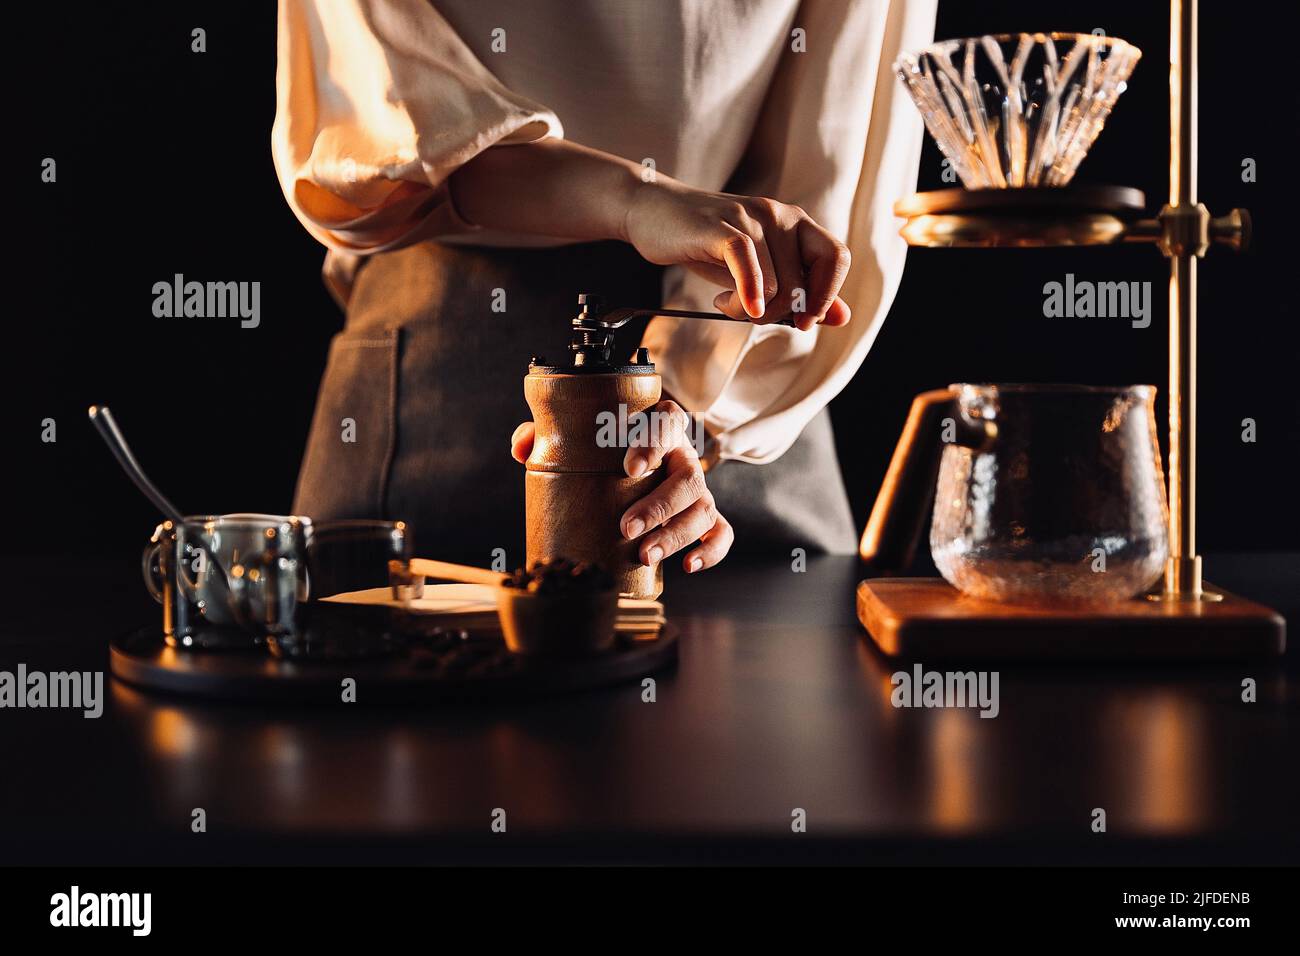 Grinding coffee beans, barista making handcrafted artisan coffee - stock photo Stock Photo